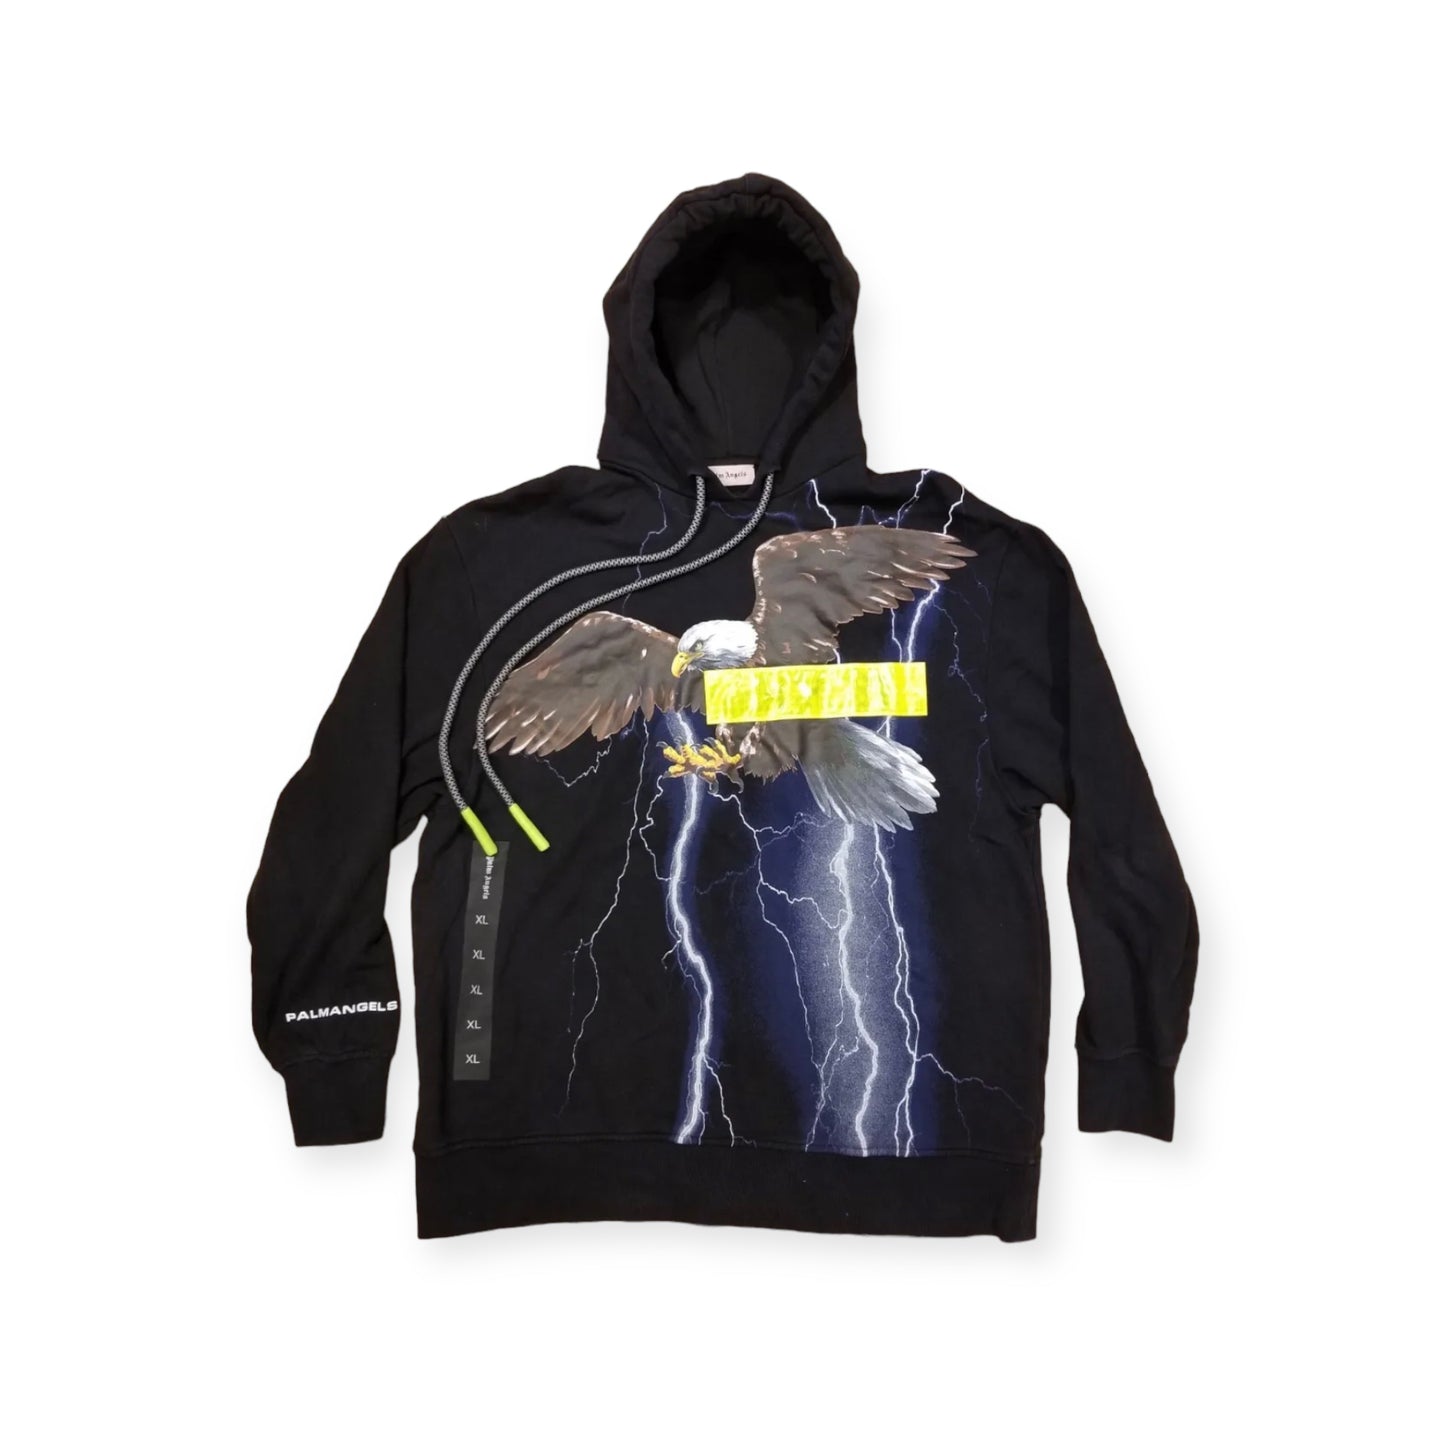 Brand New Palm Angels Storm Eagle hoodie Size L